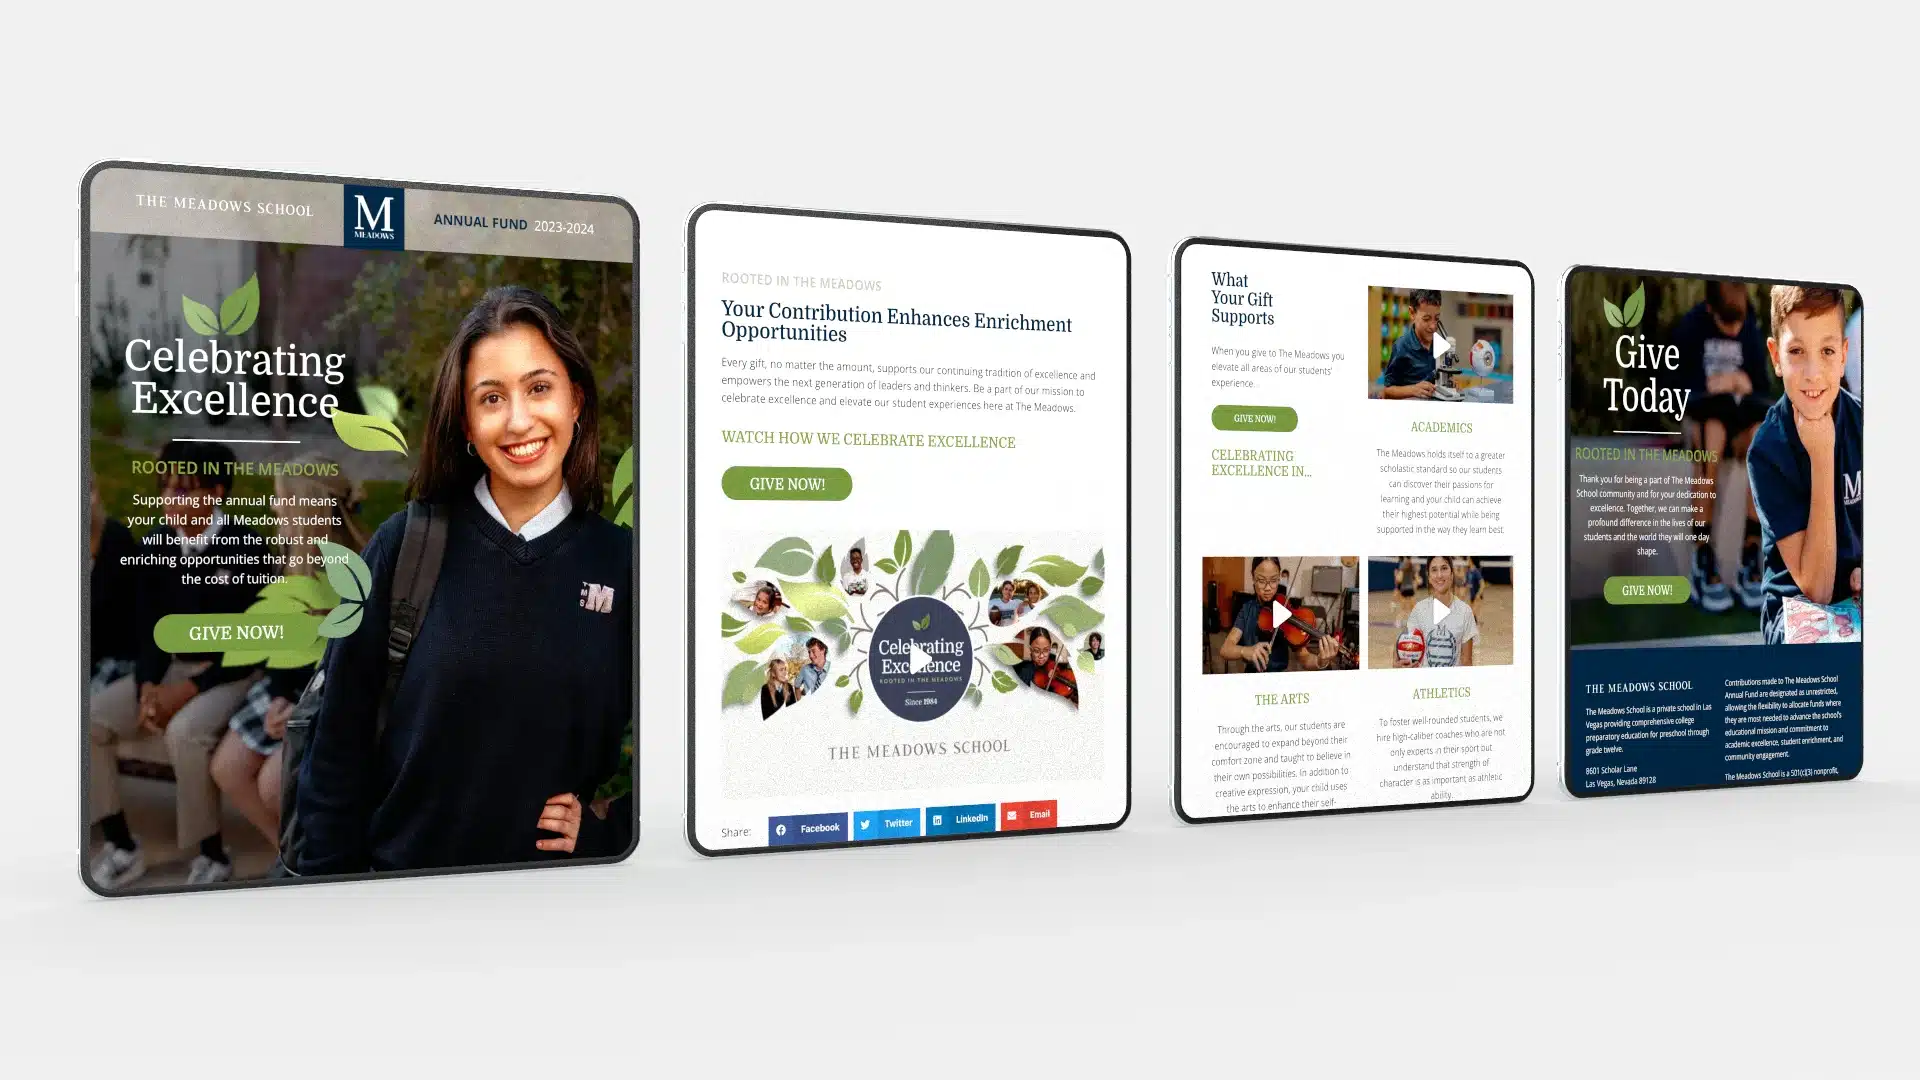 The Meadows School Fundraising Campaign website pages on tablets